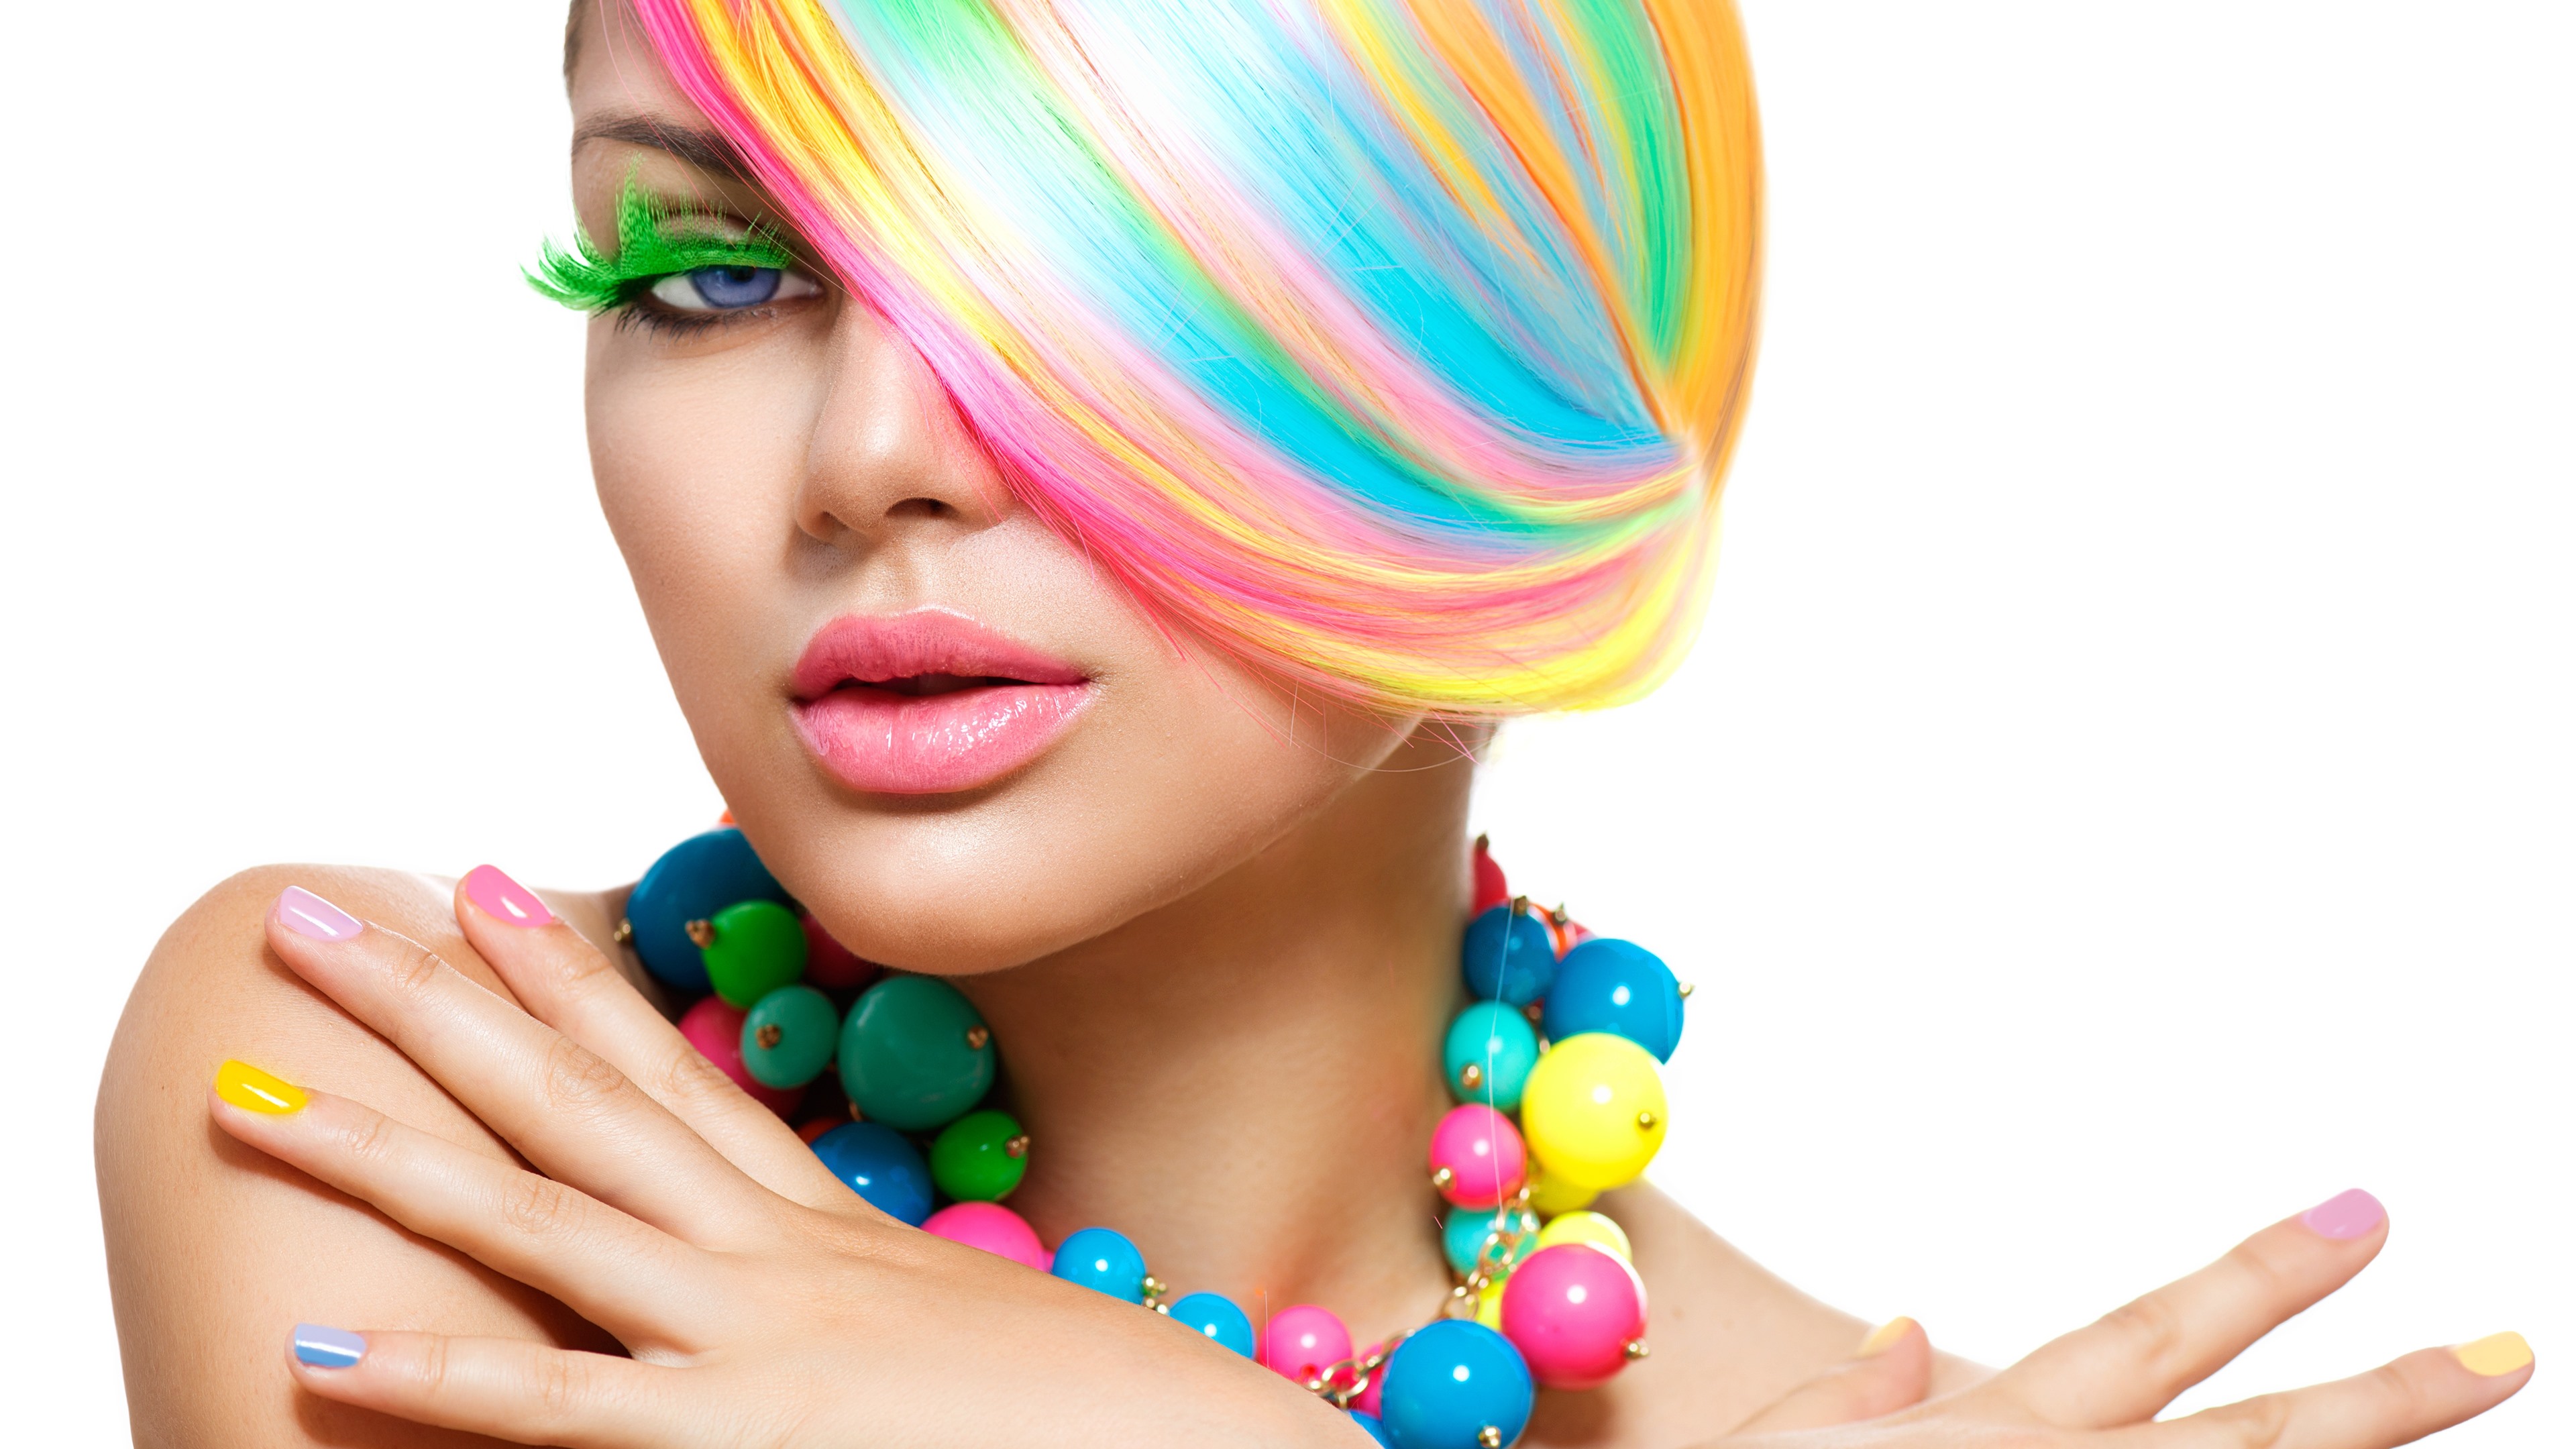 Wallpaper Fashion girl, rainbow colors hair, colorful beads 5120x2880 UHD 5K Picture, Image